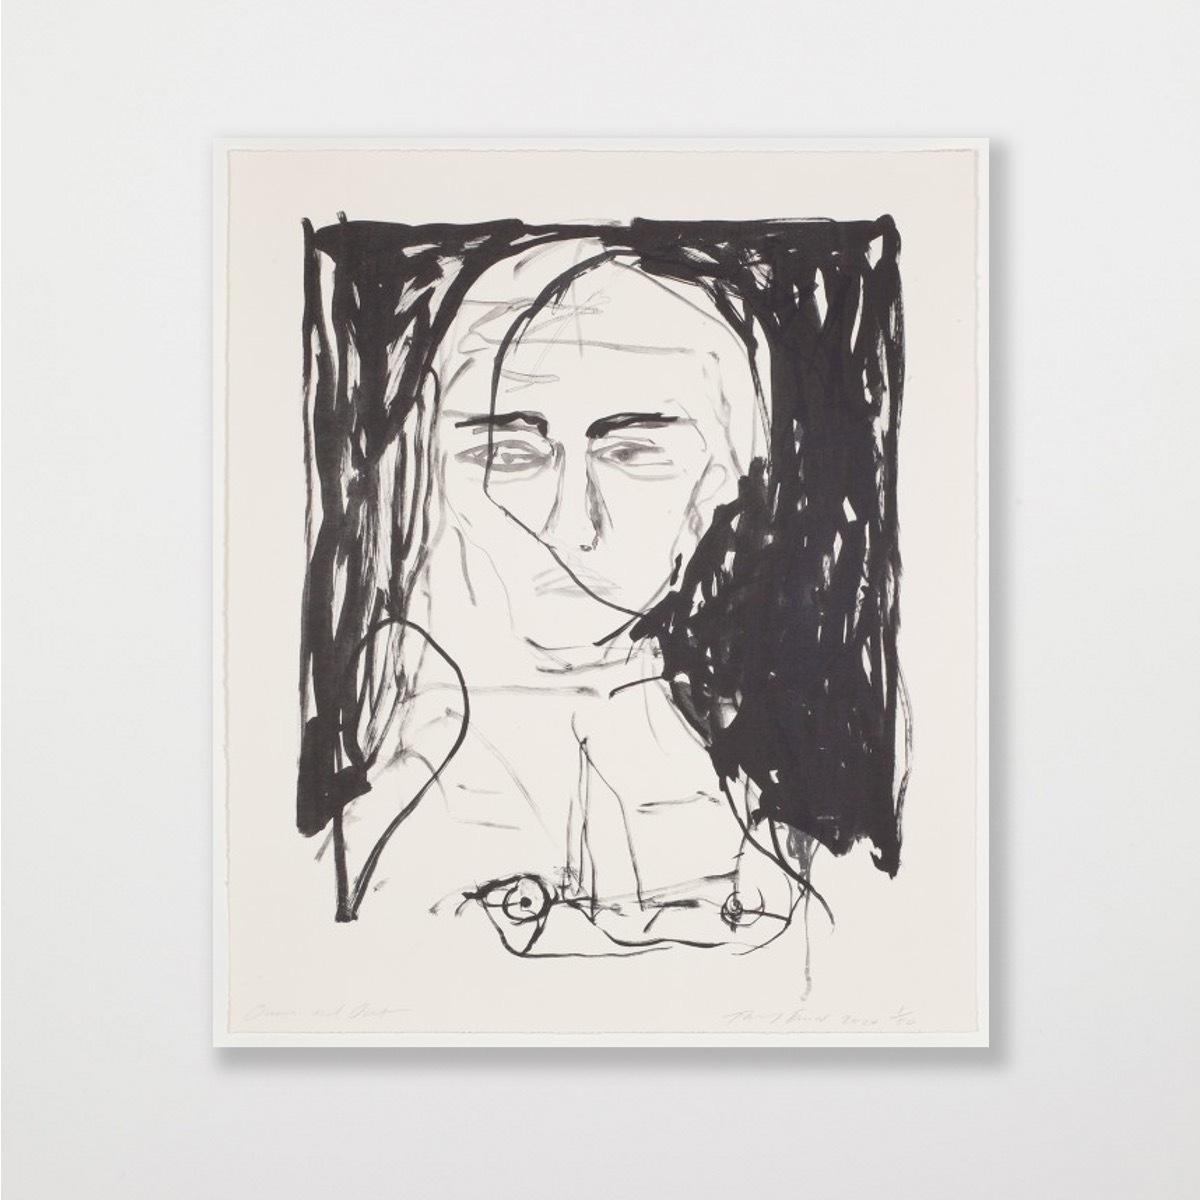 These Feelings Were True -Emin, Contemporary, YBAs, Lithograph, Blue, Portrait - Young British Artists (YBA) Print by Tracey Emin